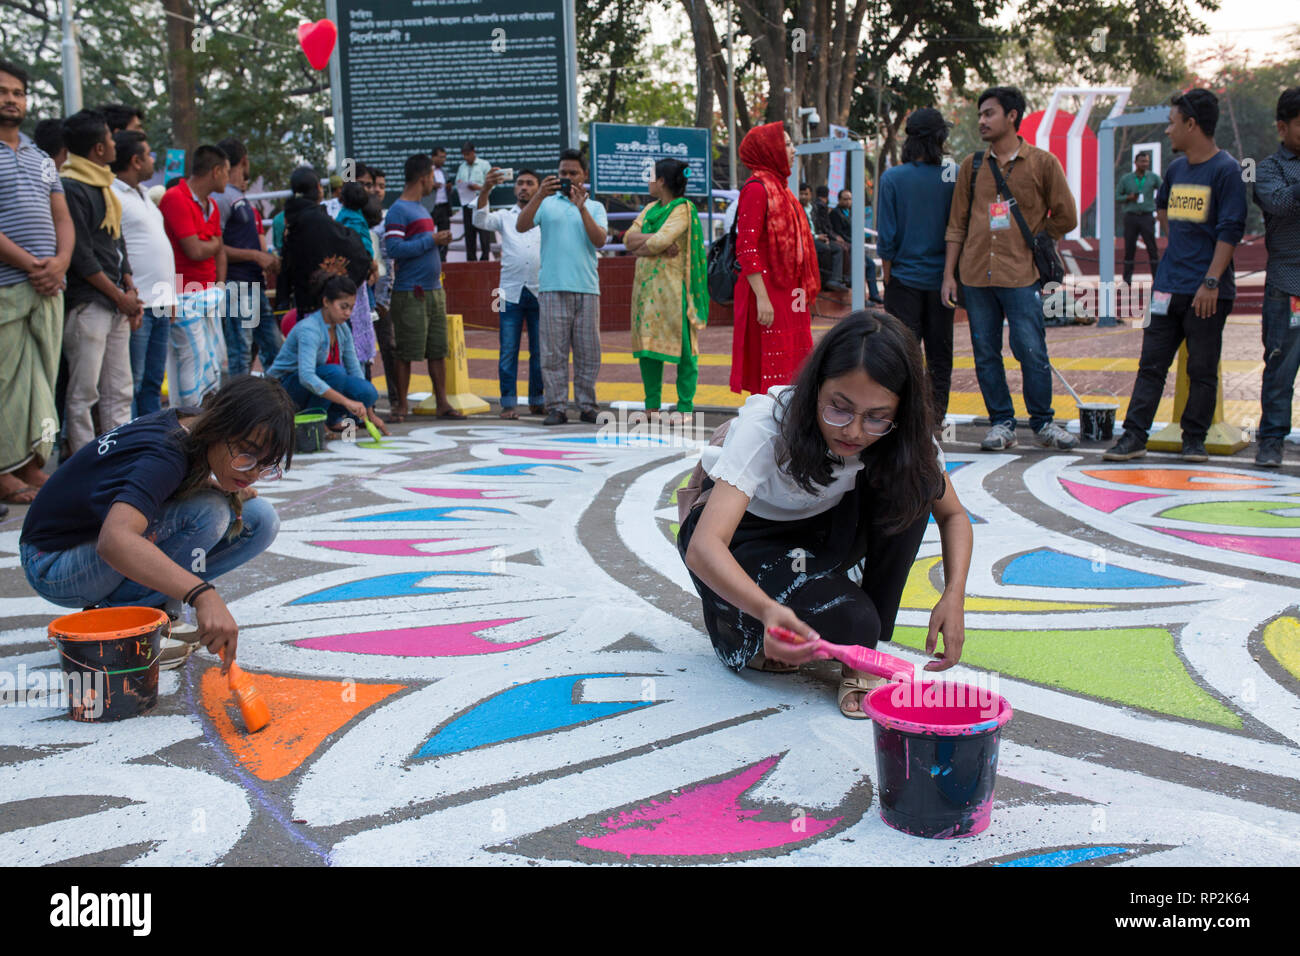 Dhaka, Bangladesh. 20th Feb, 2019.  Bangladeshi students paints on the street as part of the decoration for the International Mother Language Day celebration in front of the language matyrs monument  in Dhaka, Bangladesh on February 20, 2019.  The nation will pay tribute to the Bangla language movement martyrs who sacrificed their life for their mother tongue in 1952, while the United Nations Educational Scientific and Cultural Organization (UNESCO) declared 21 February as the International Mother Language Day. Credit: zakir hossain chowdhury zakir/Alamy Live N Stock Photo